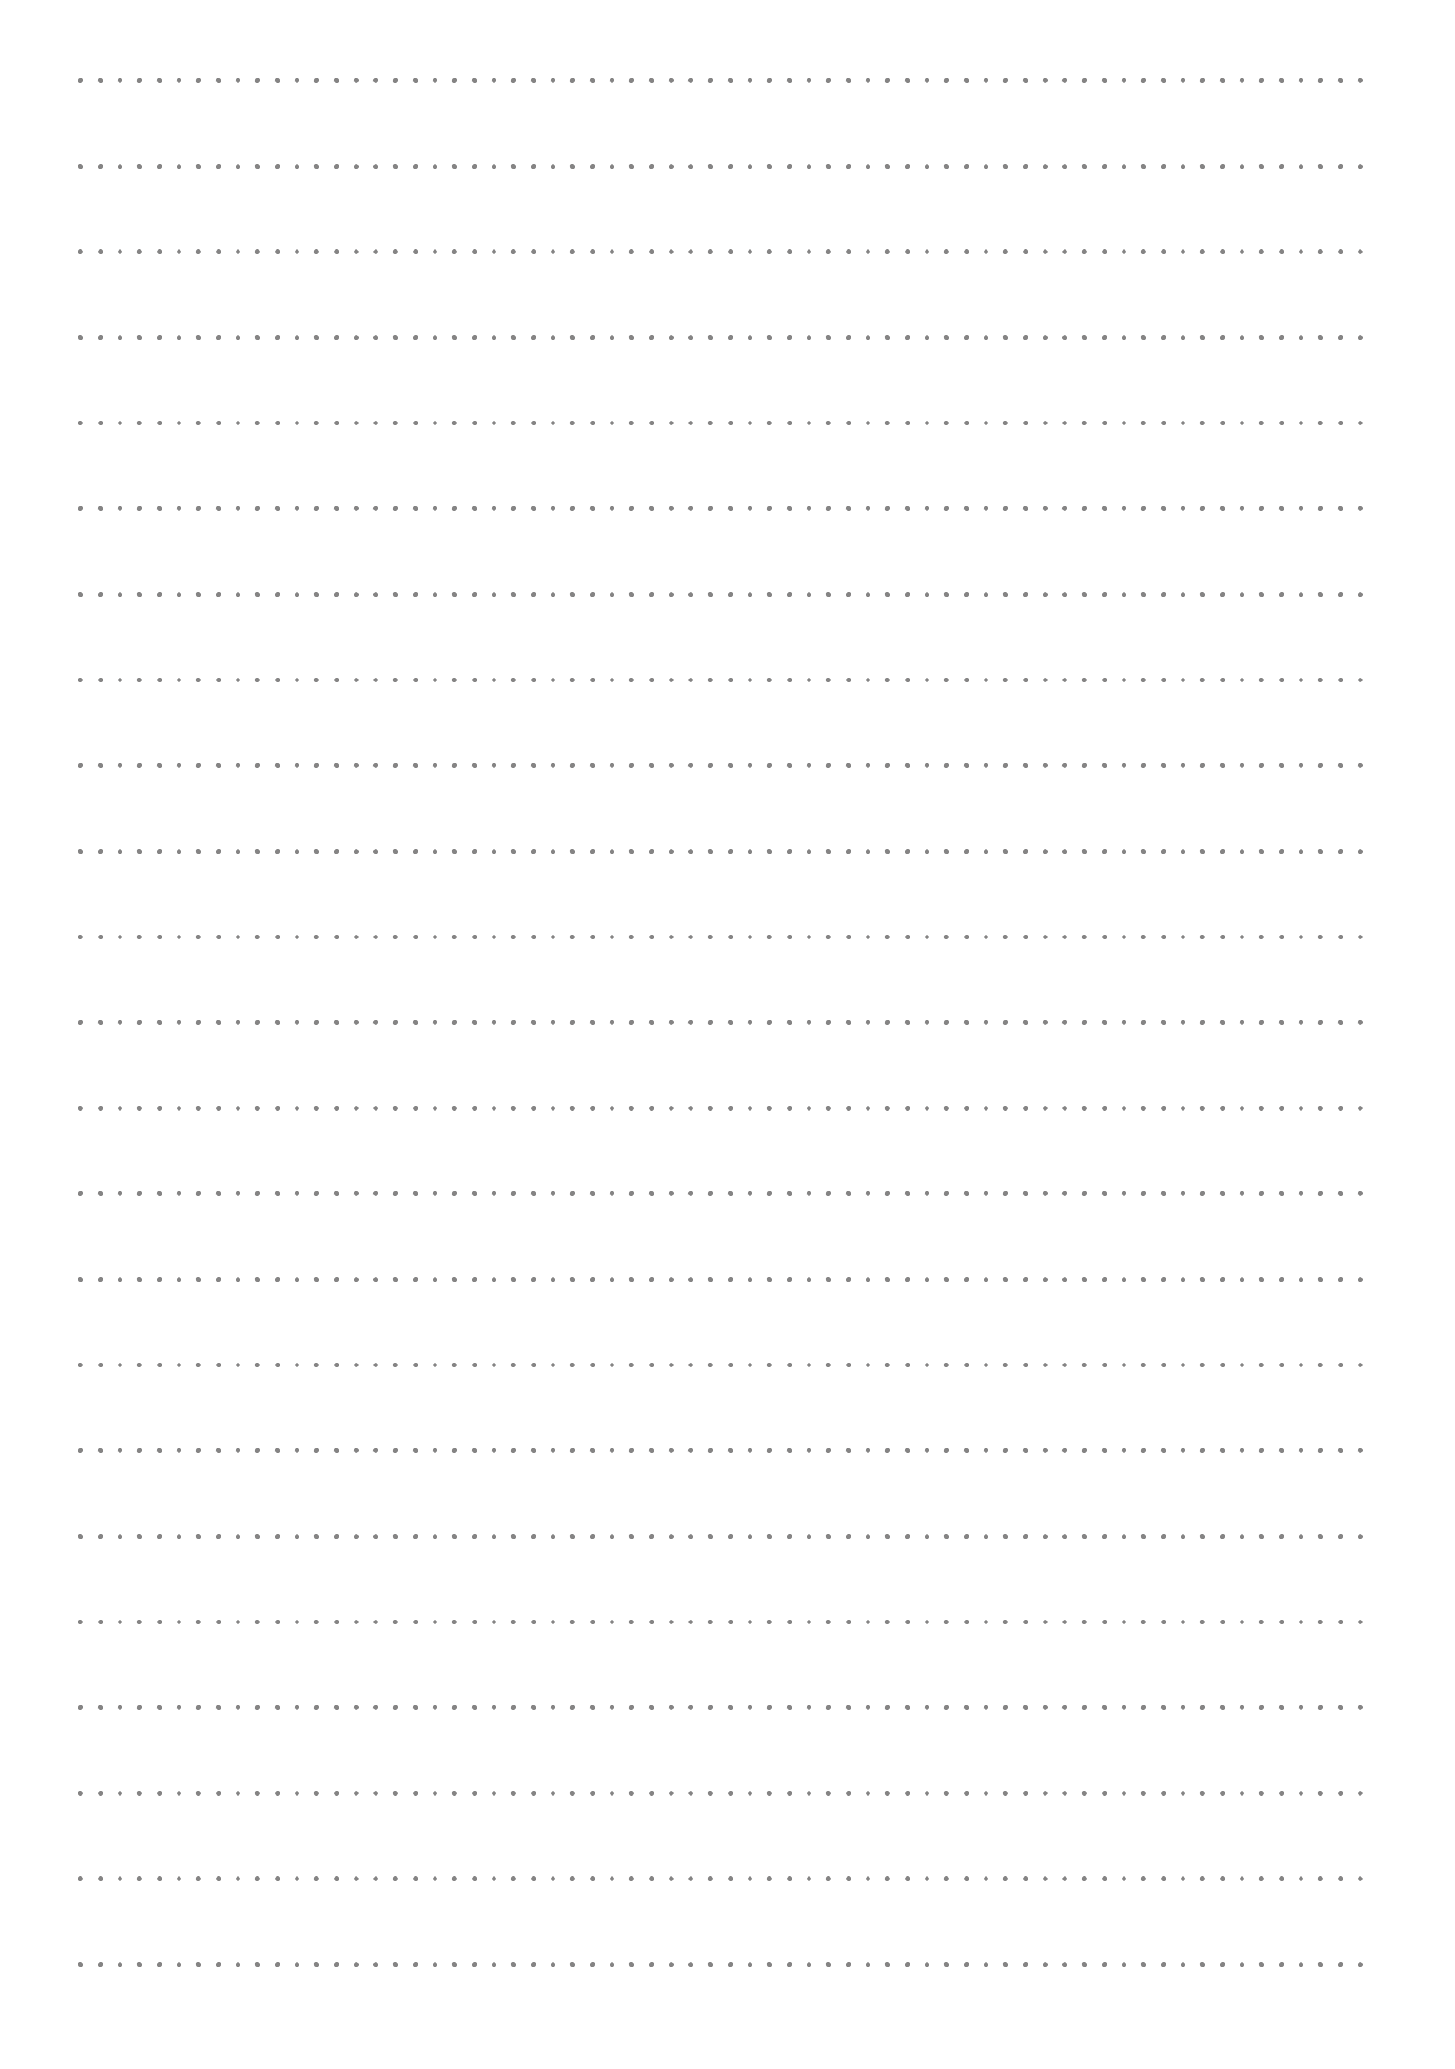 Printable Dotted Lined Paper Printables 8 7 Mm Line Height PDF Download 